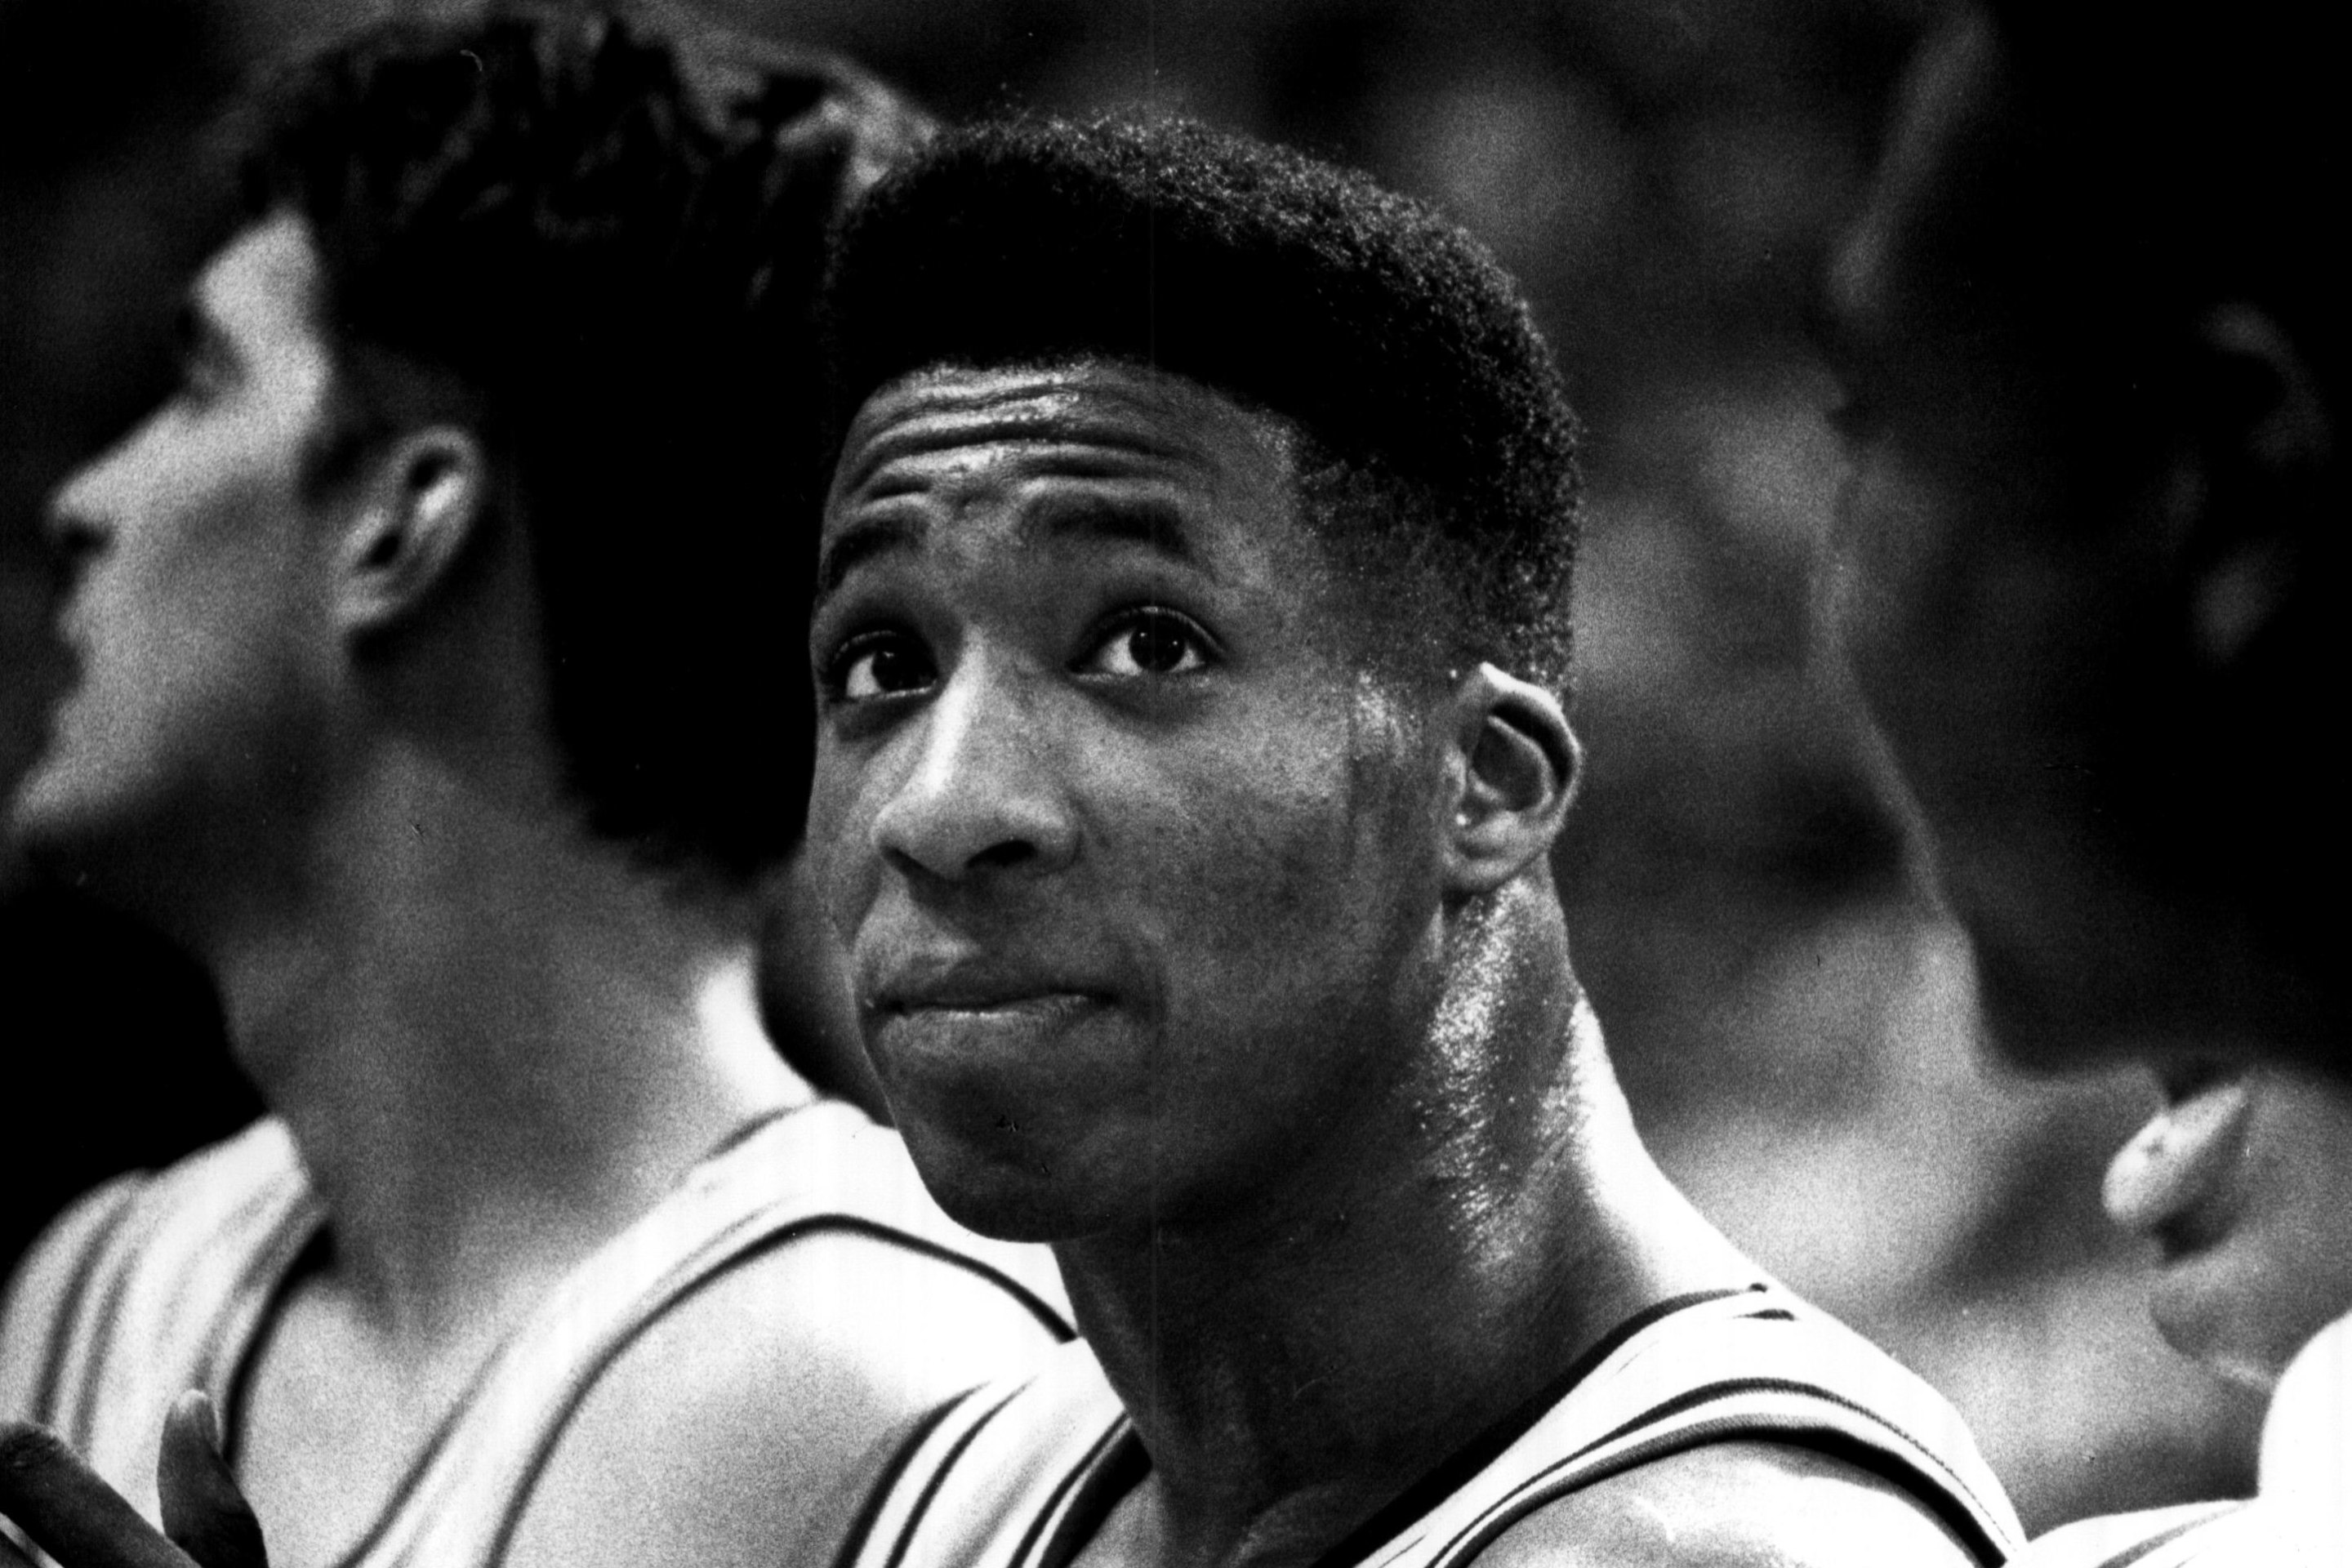 Duke wing player Brian Davis seen on the team's bench in 1991.